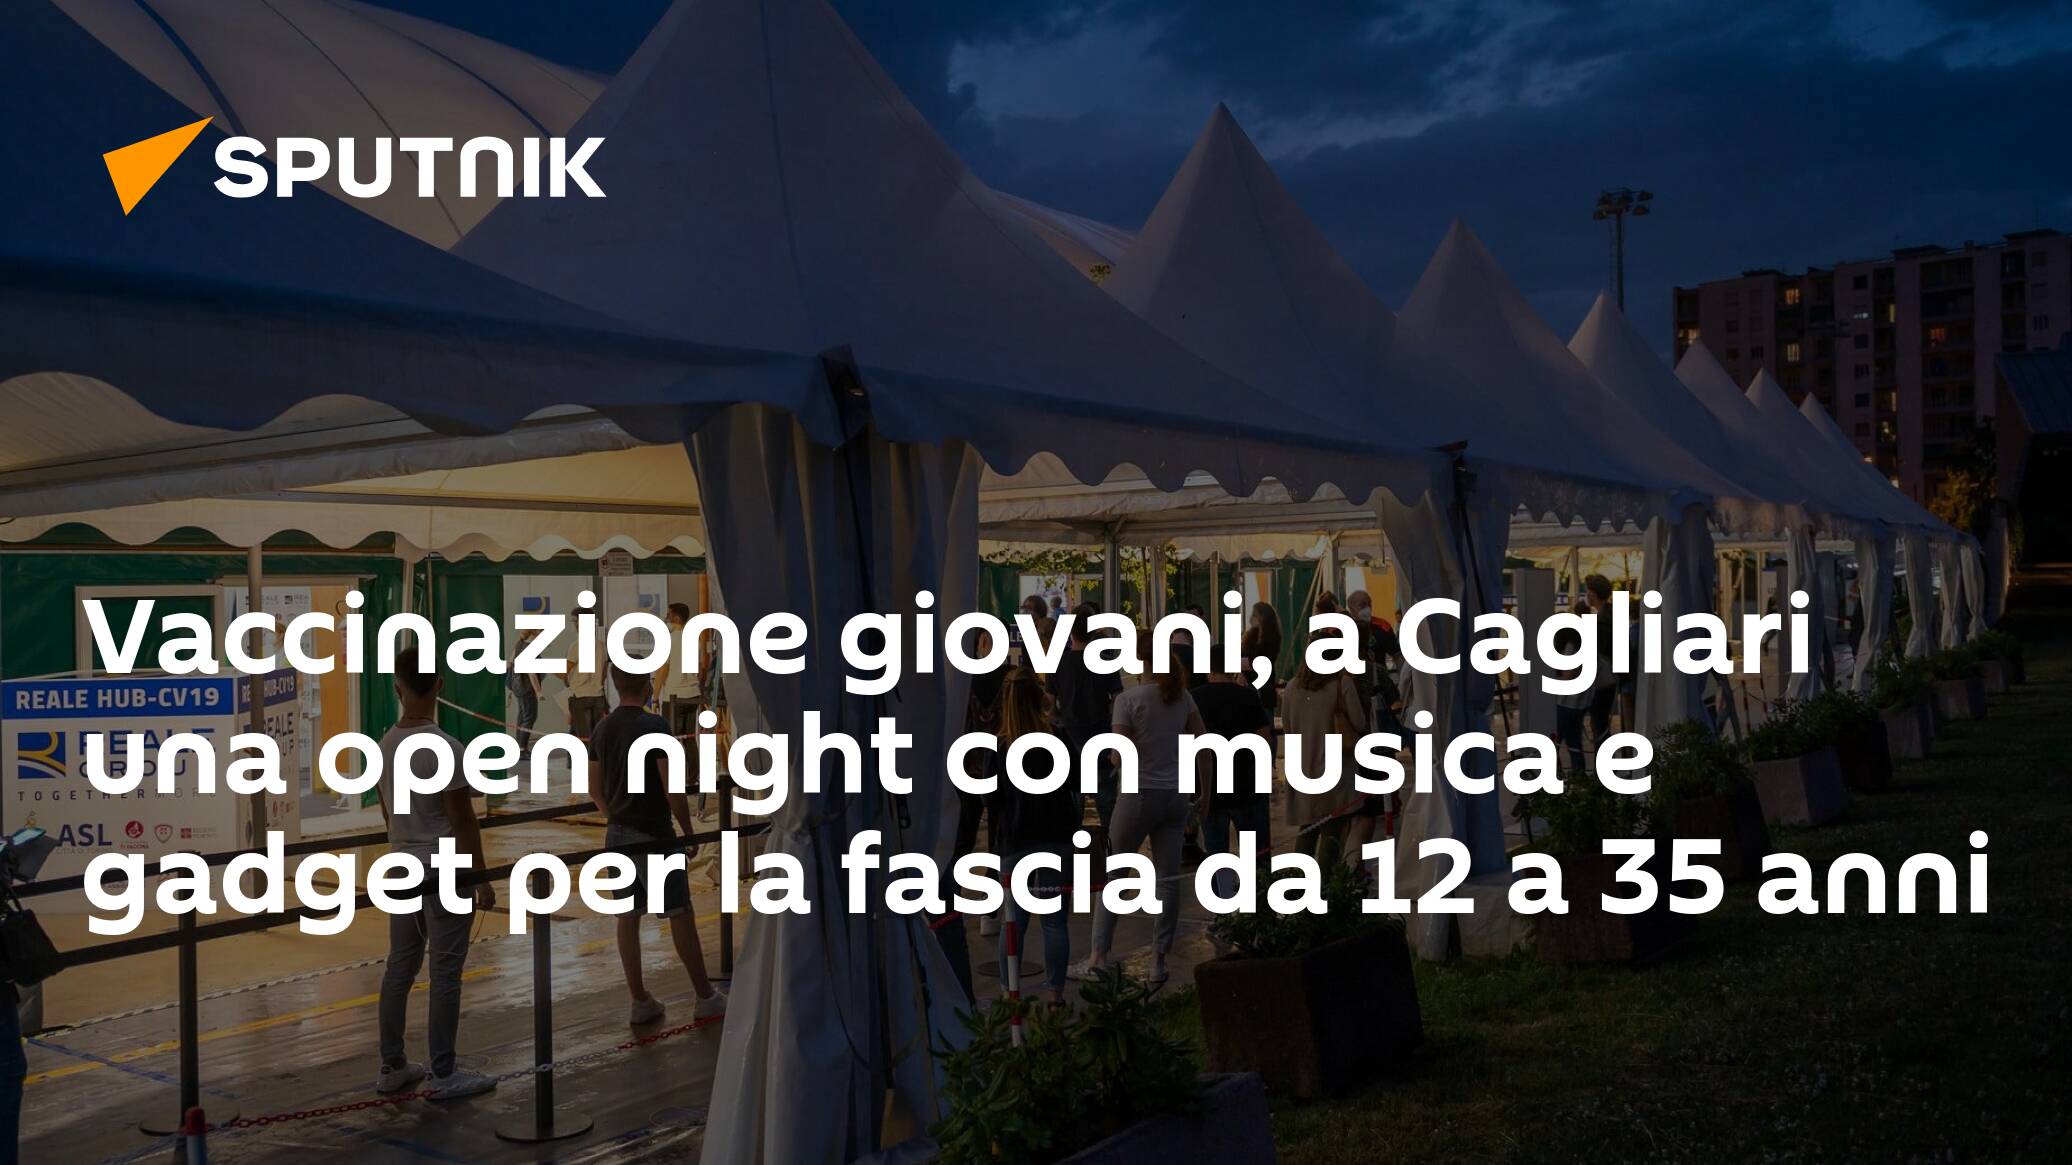 Youth vaccination, open night in Cagliari with music and instruments for the age group from 12 to 35